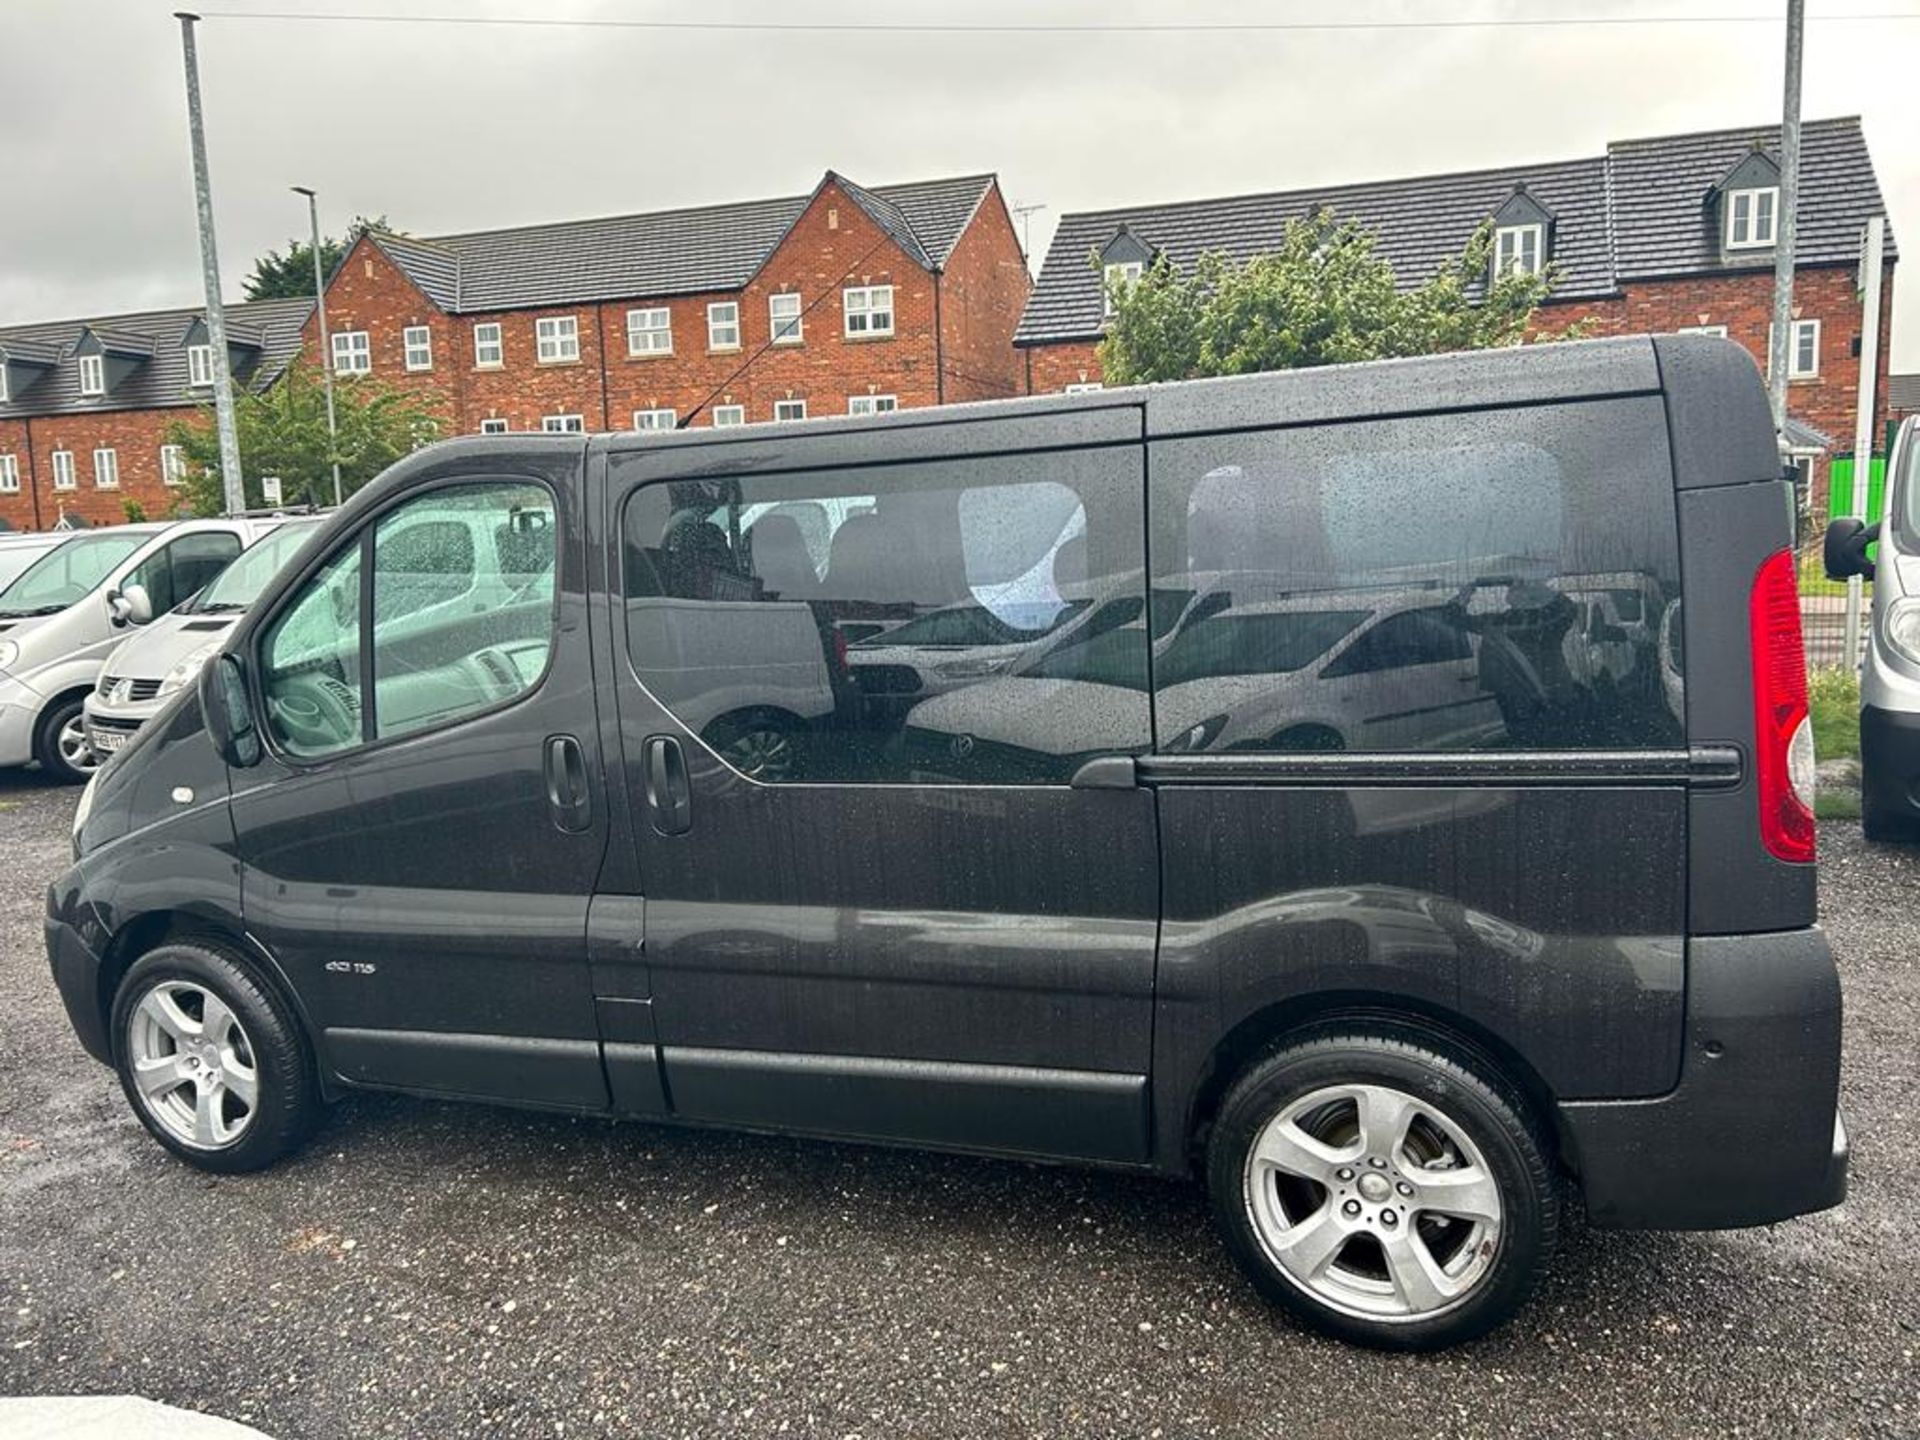 2010 RENAULT TRAFIC SL27 DCI 115 BLACK VAN DERIVED CAR WITH MOBILITY WHEELCHAIR ACCESS *NO VAT* - Image 4 of 18